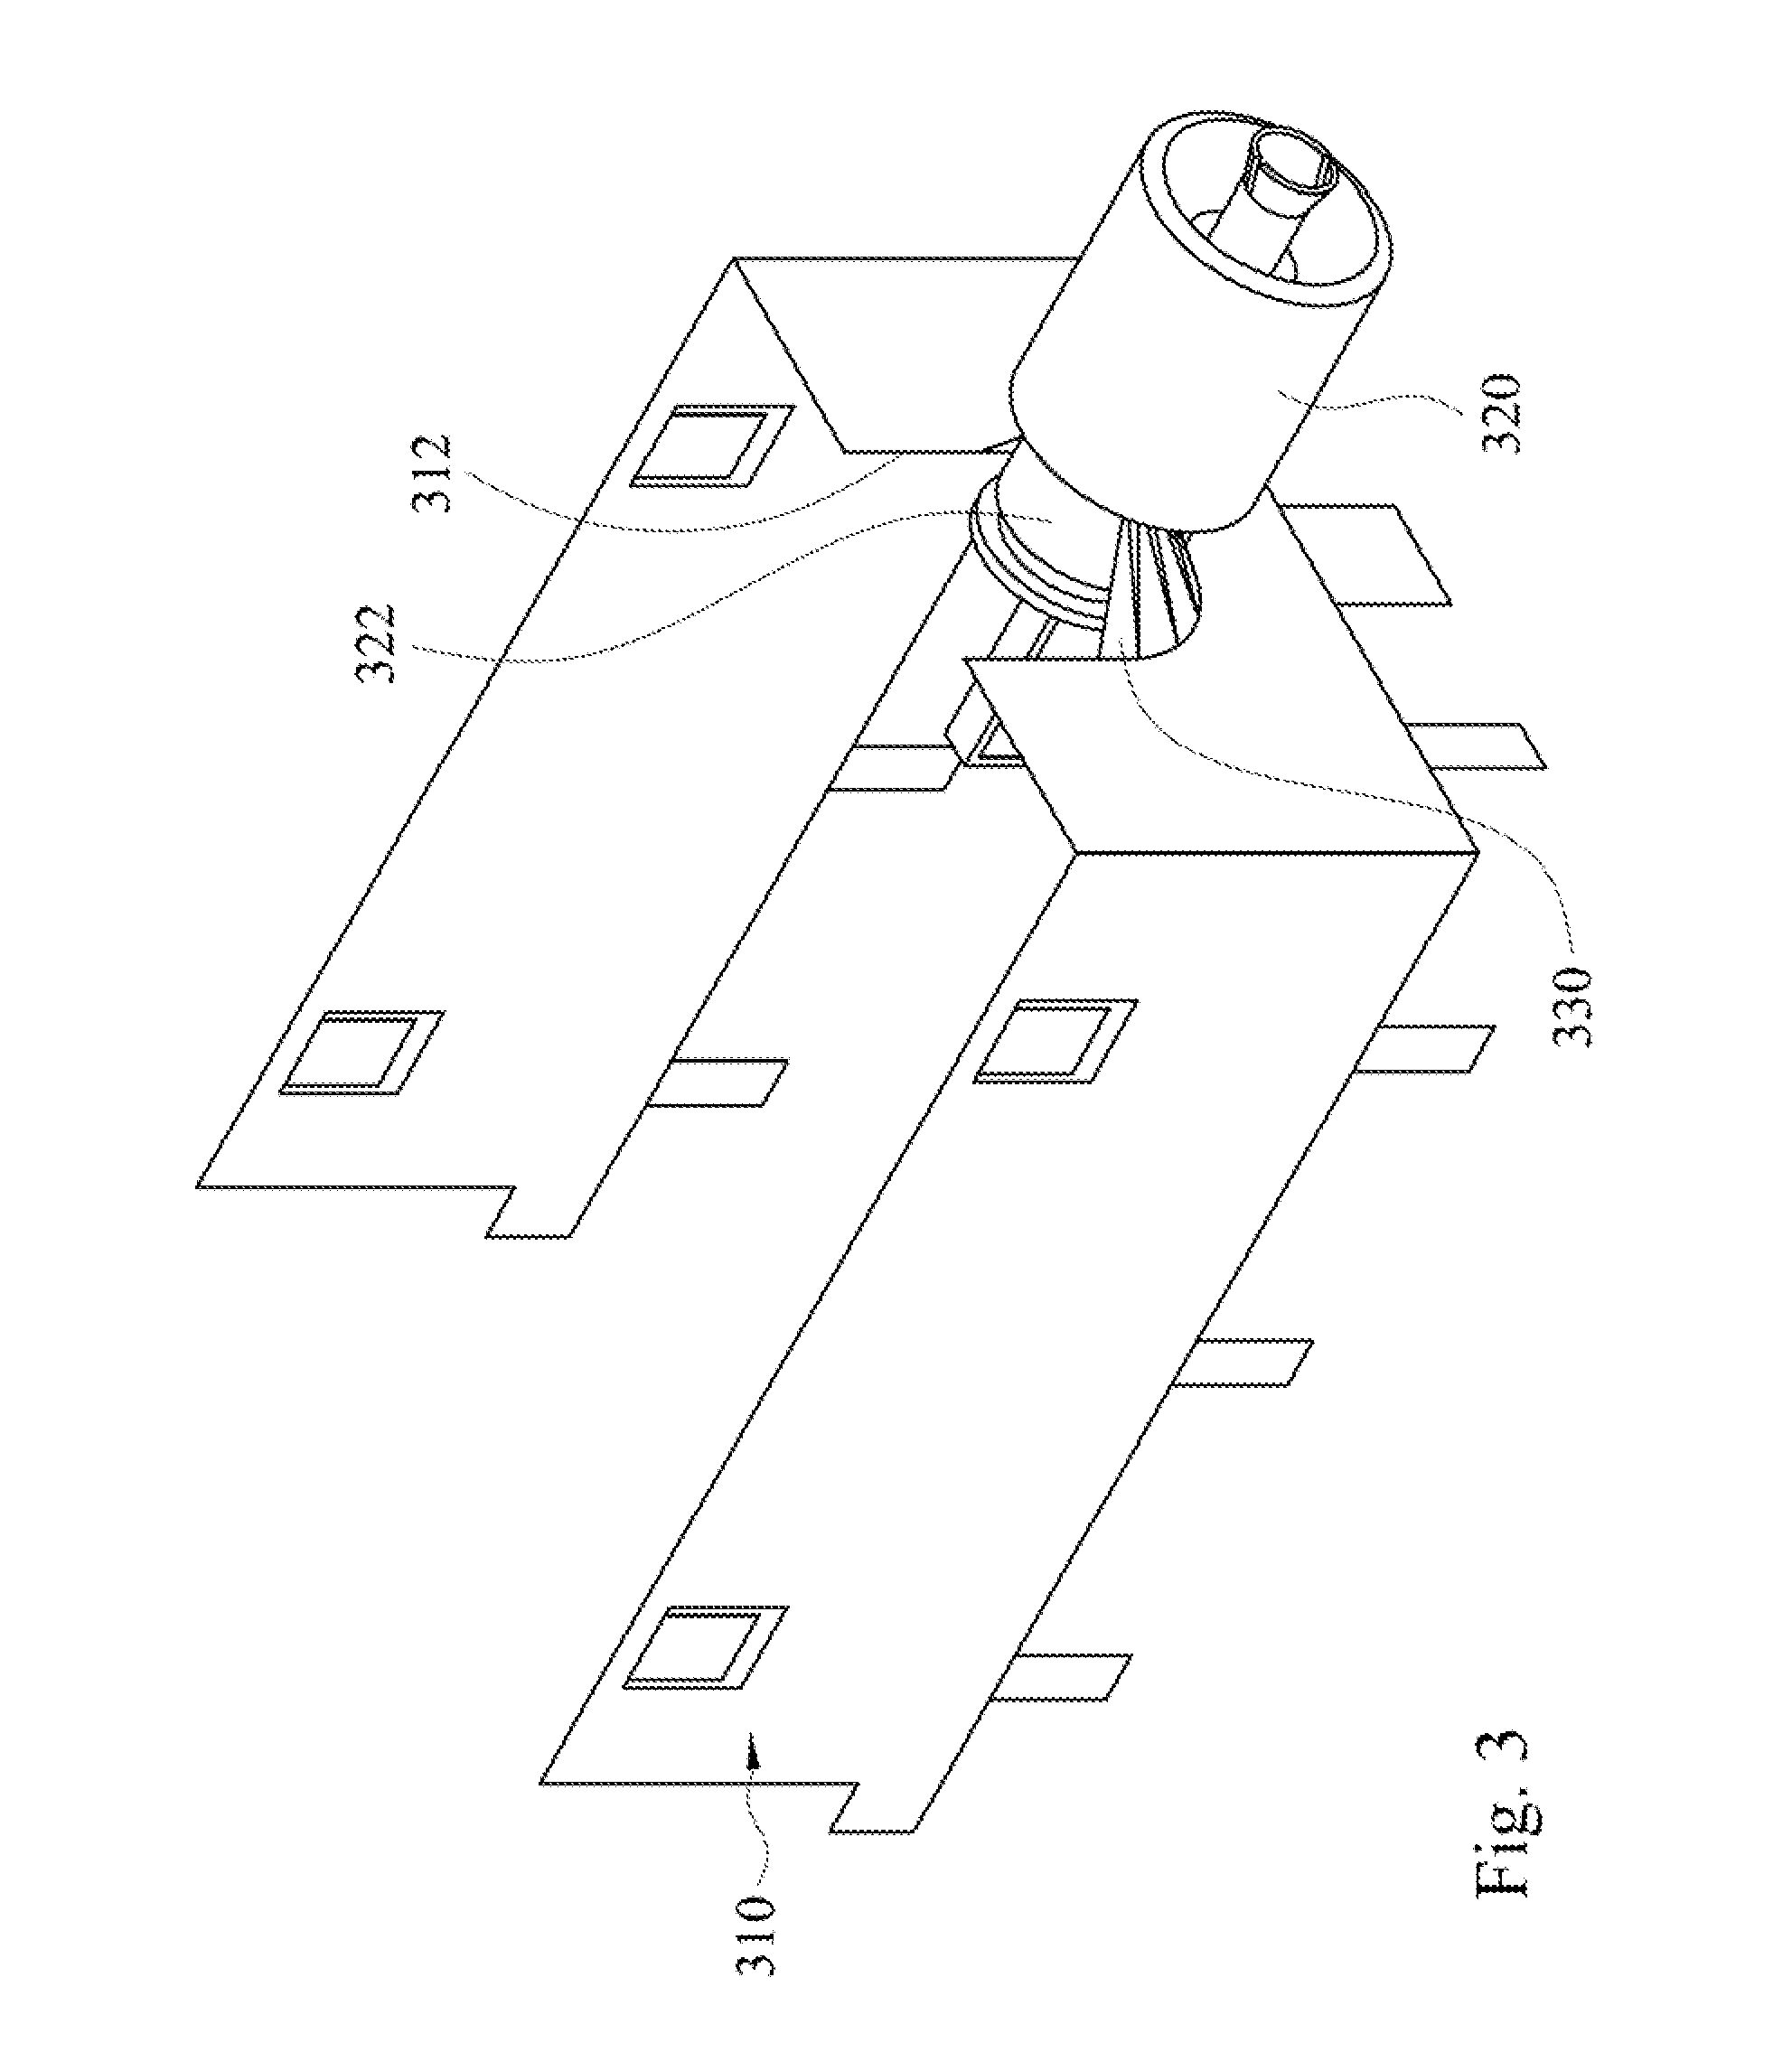 Modular tuner and method for manufacturing the same